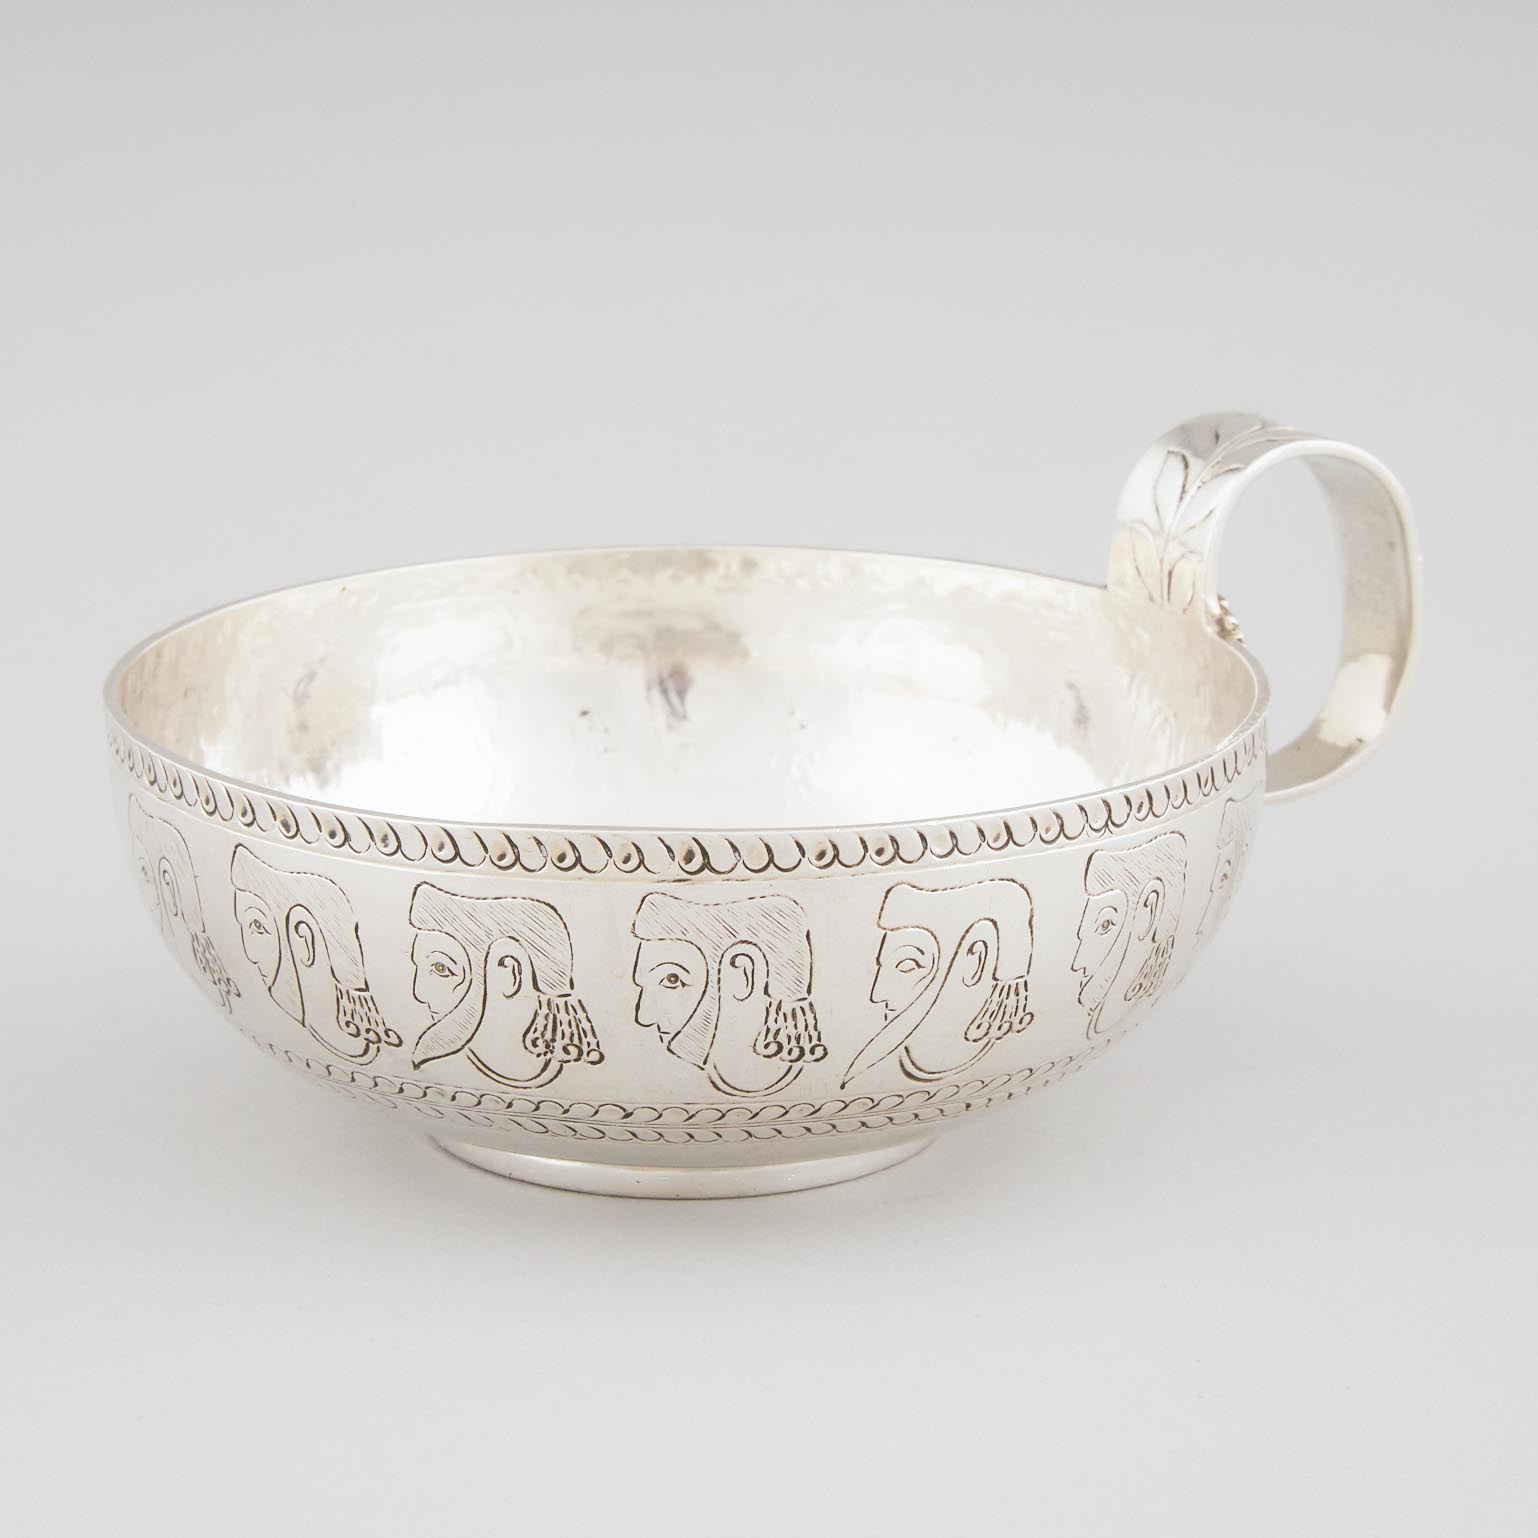 Edwardian Silver 'Mycenaean' Cup, George Nathan & Ridley Hayes, Chester, 1906